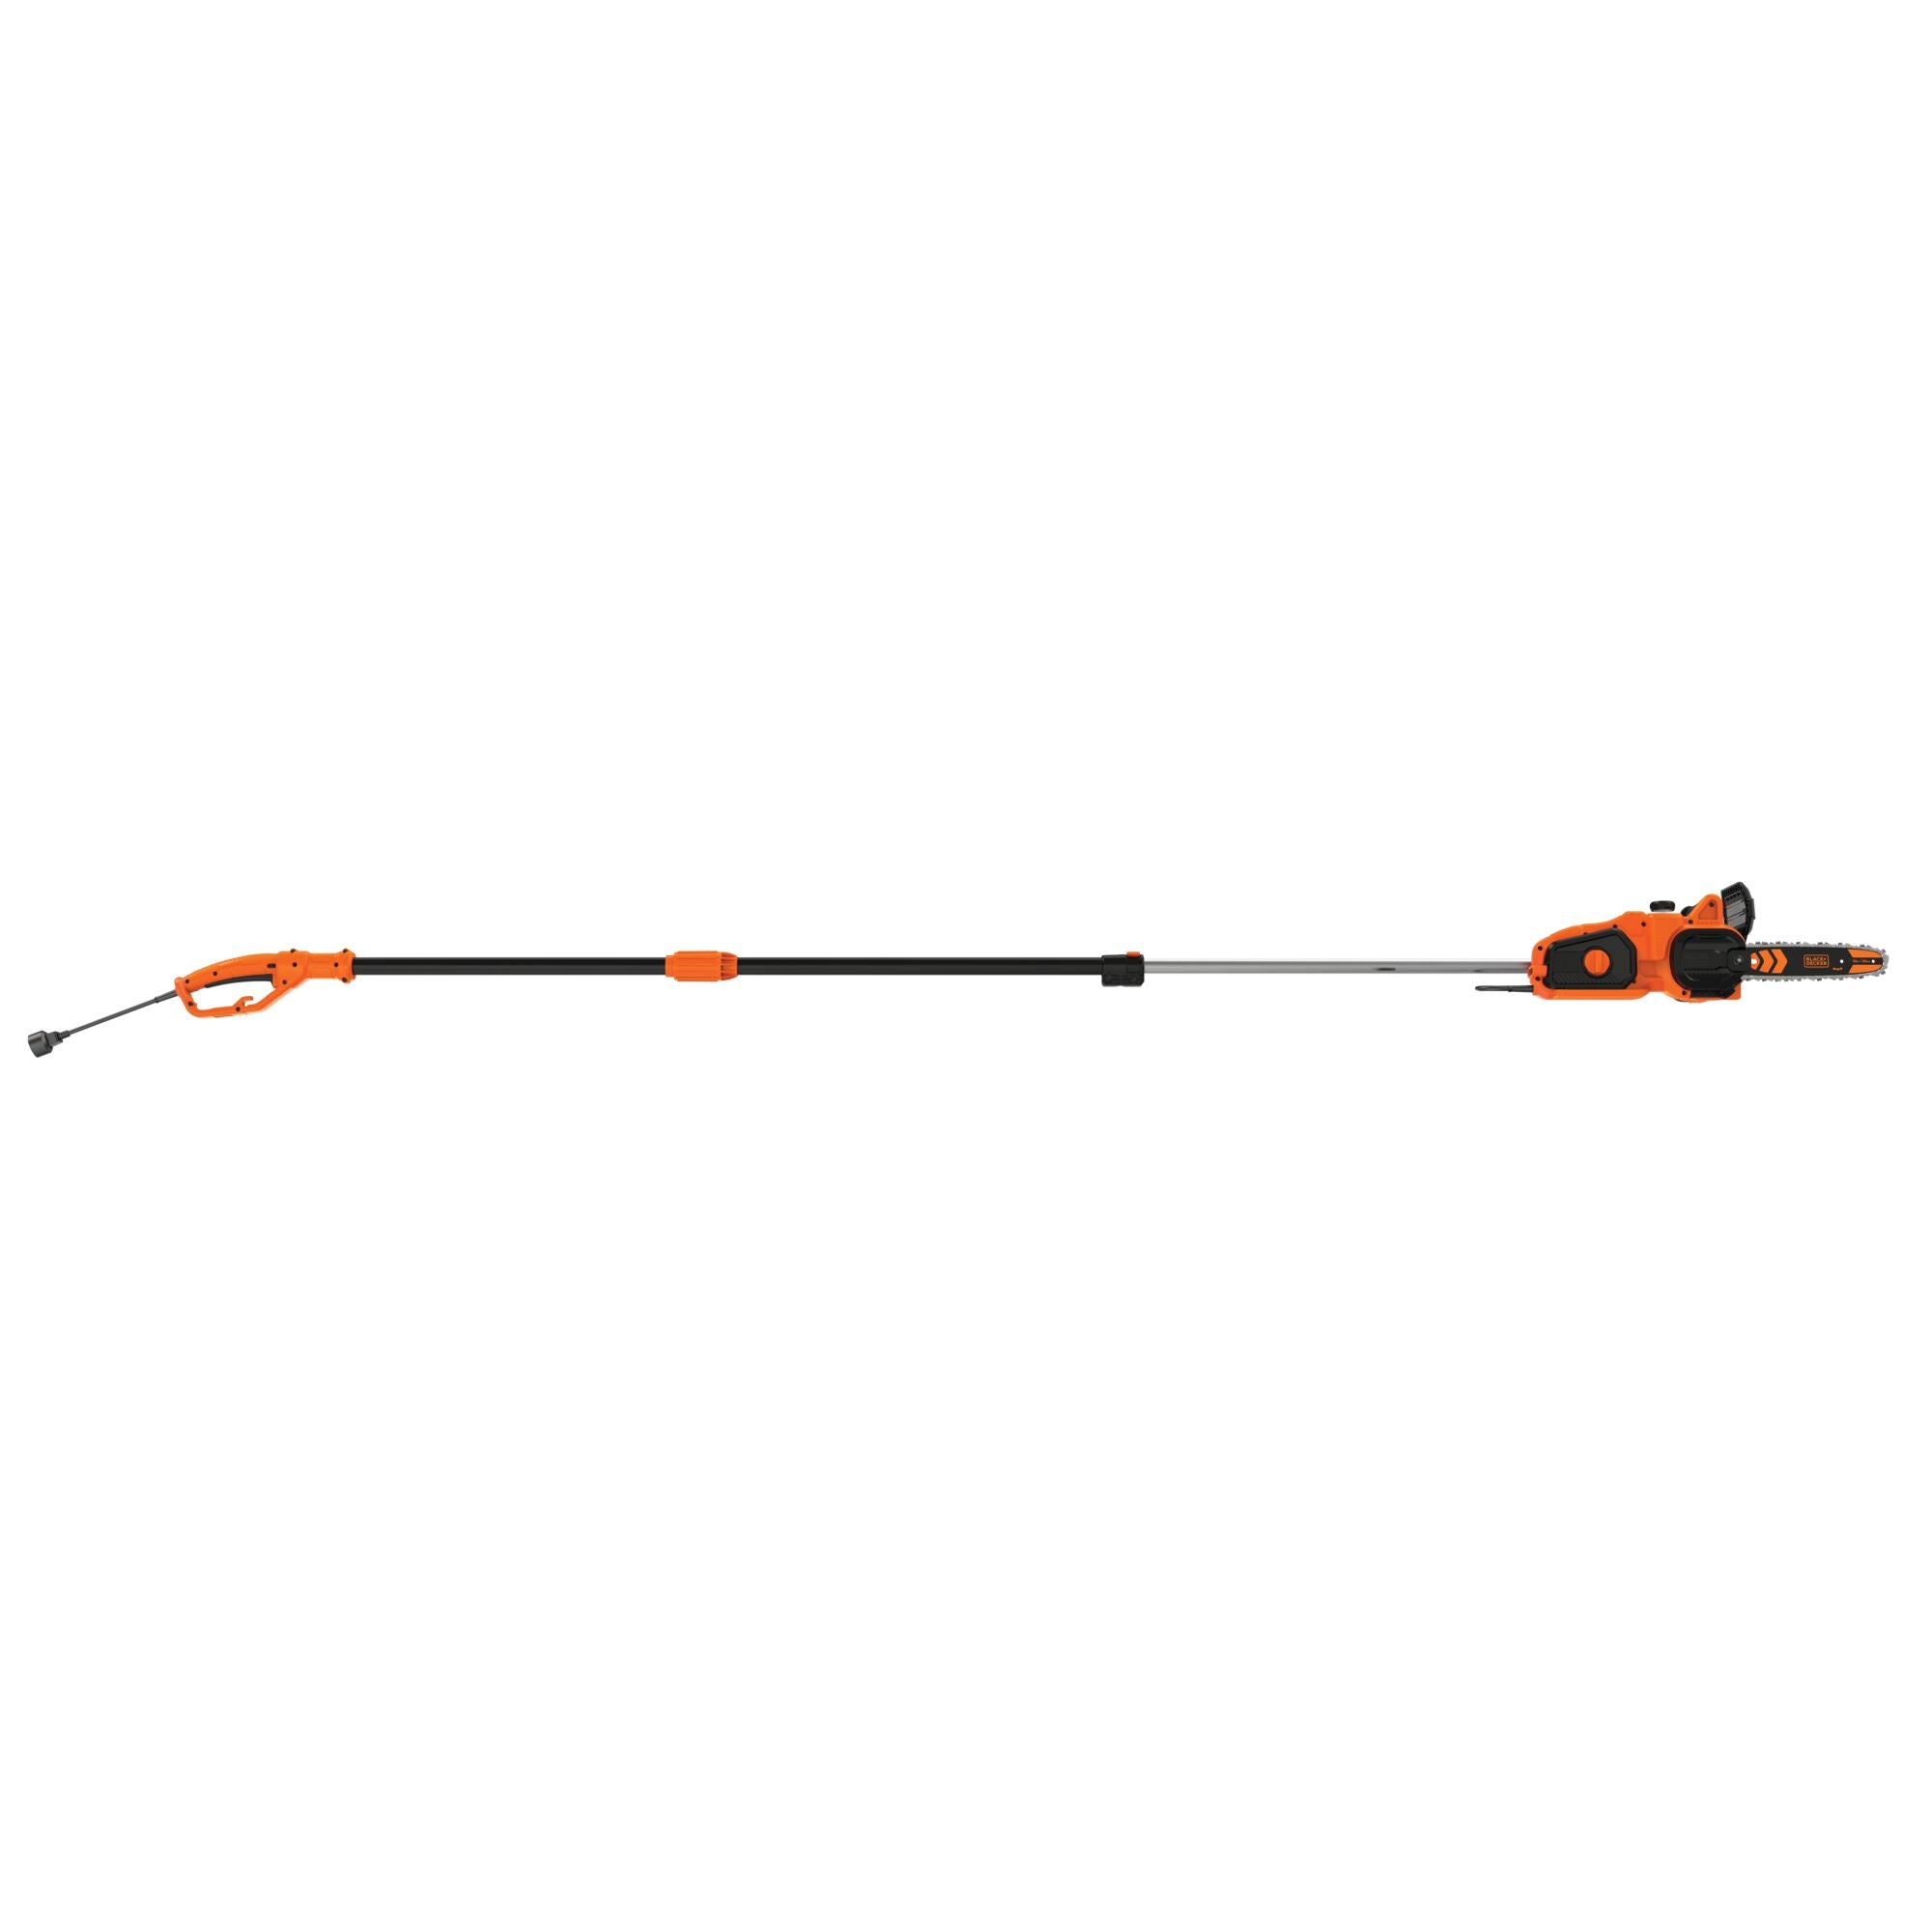 Profile of 8 ampere 10 inch 2 in 1 electric pole chainsaw.